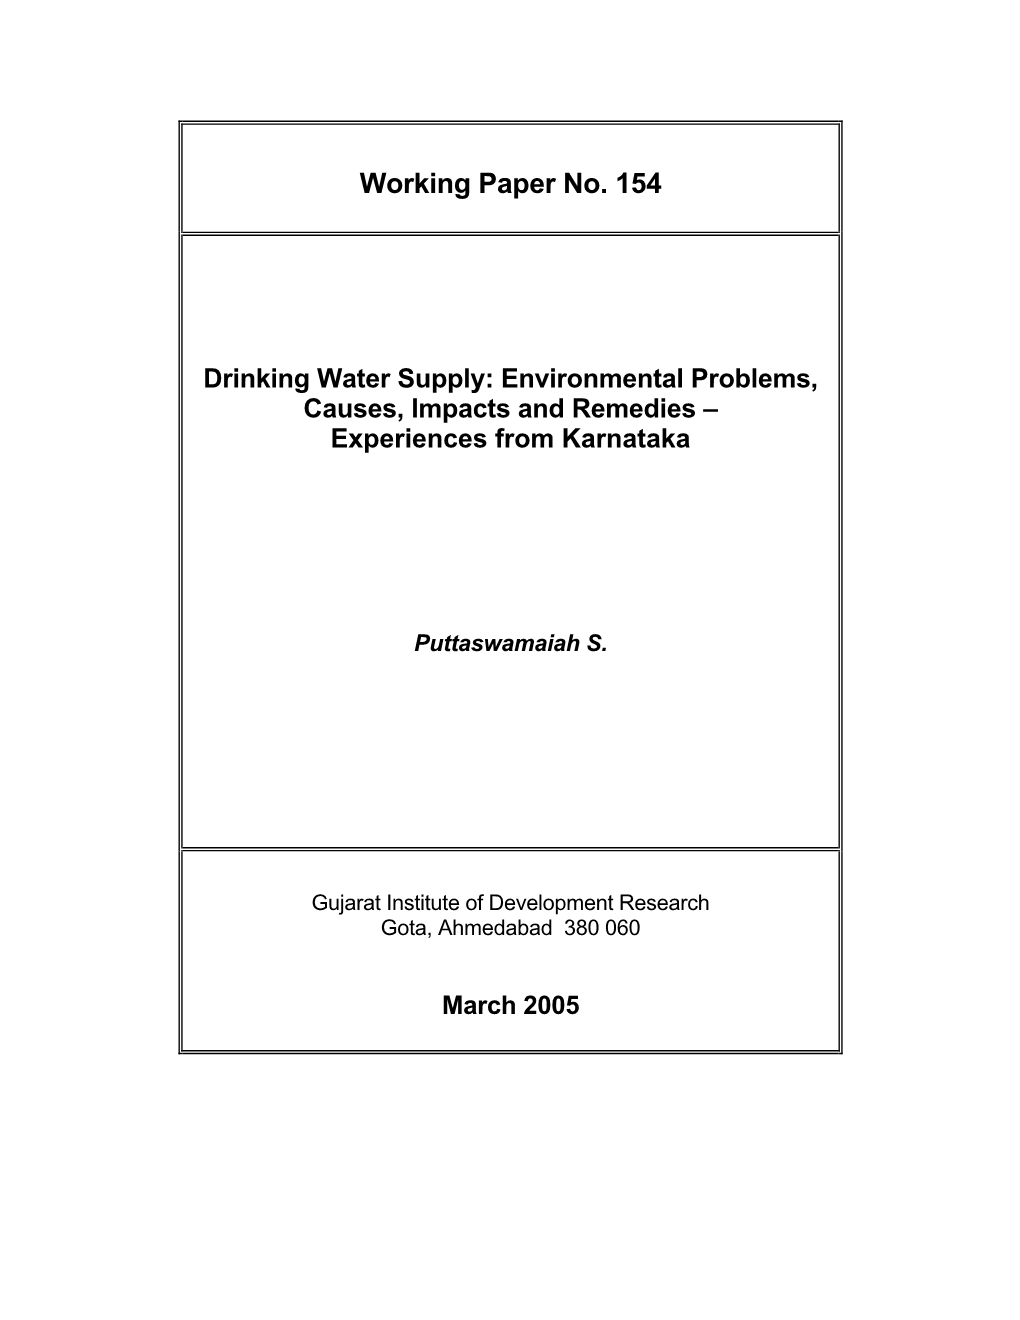 Working Paper No. 154 Drinking Water Supply